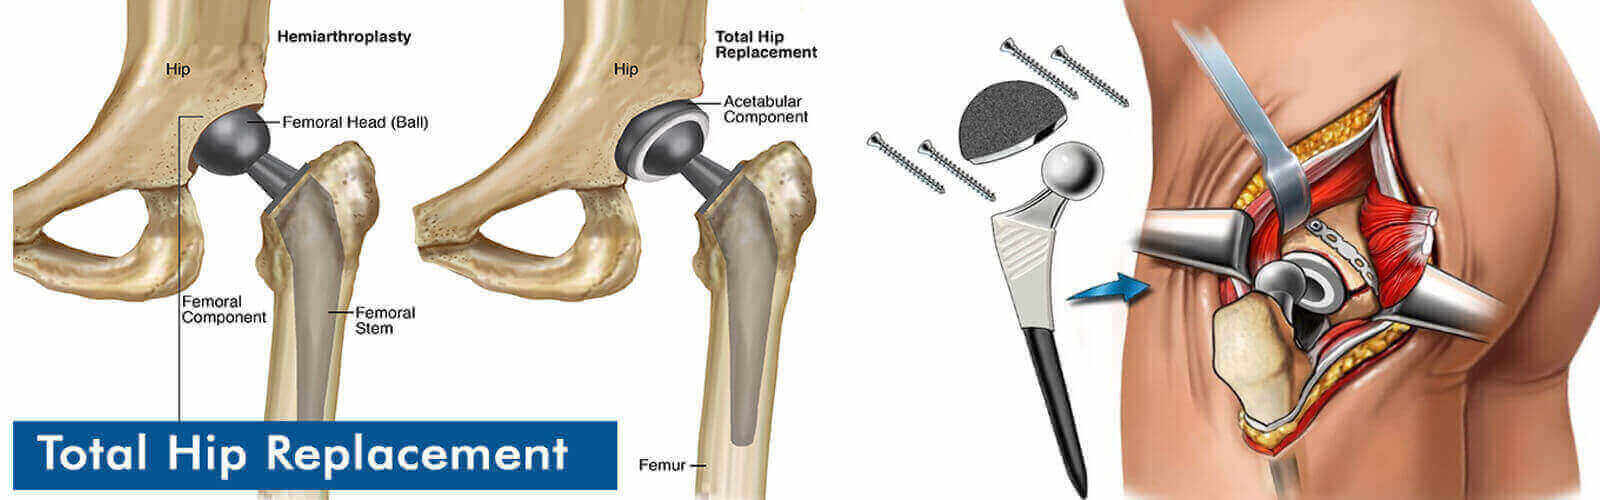 Hip Replacement Surgery Or Hip Resurfacing in United States